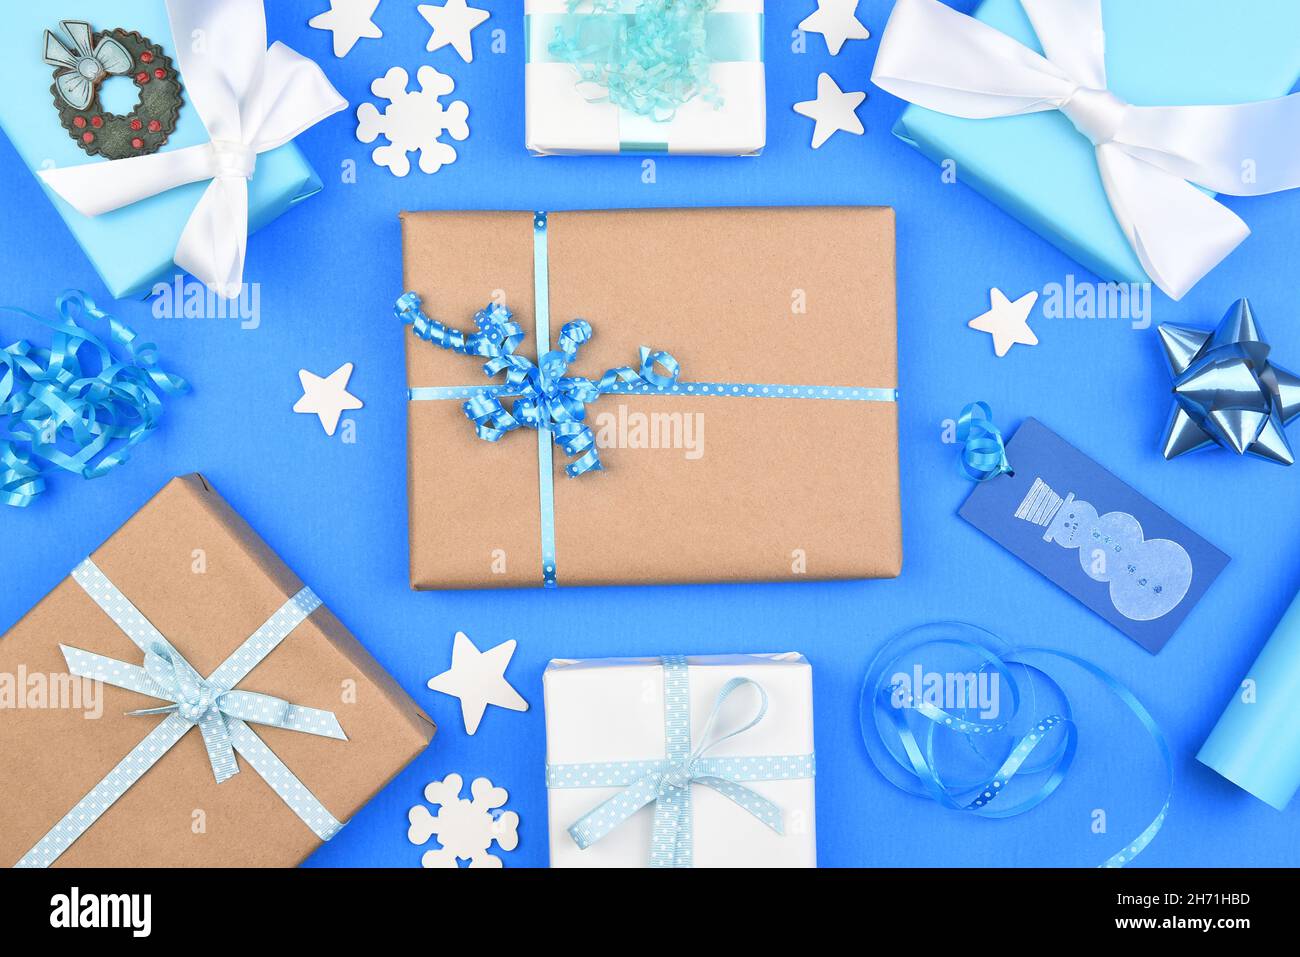 Christmas holiday flat lay composition filling the frame on a blue background. Stock Photo